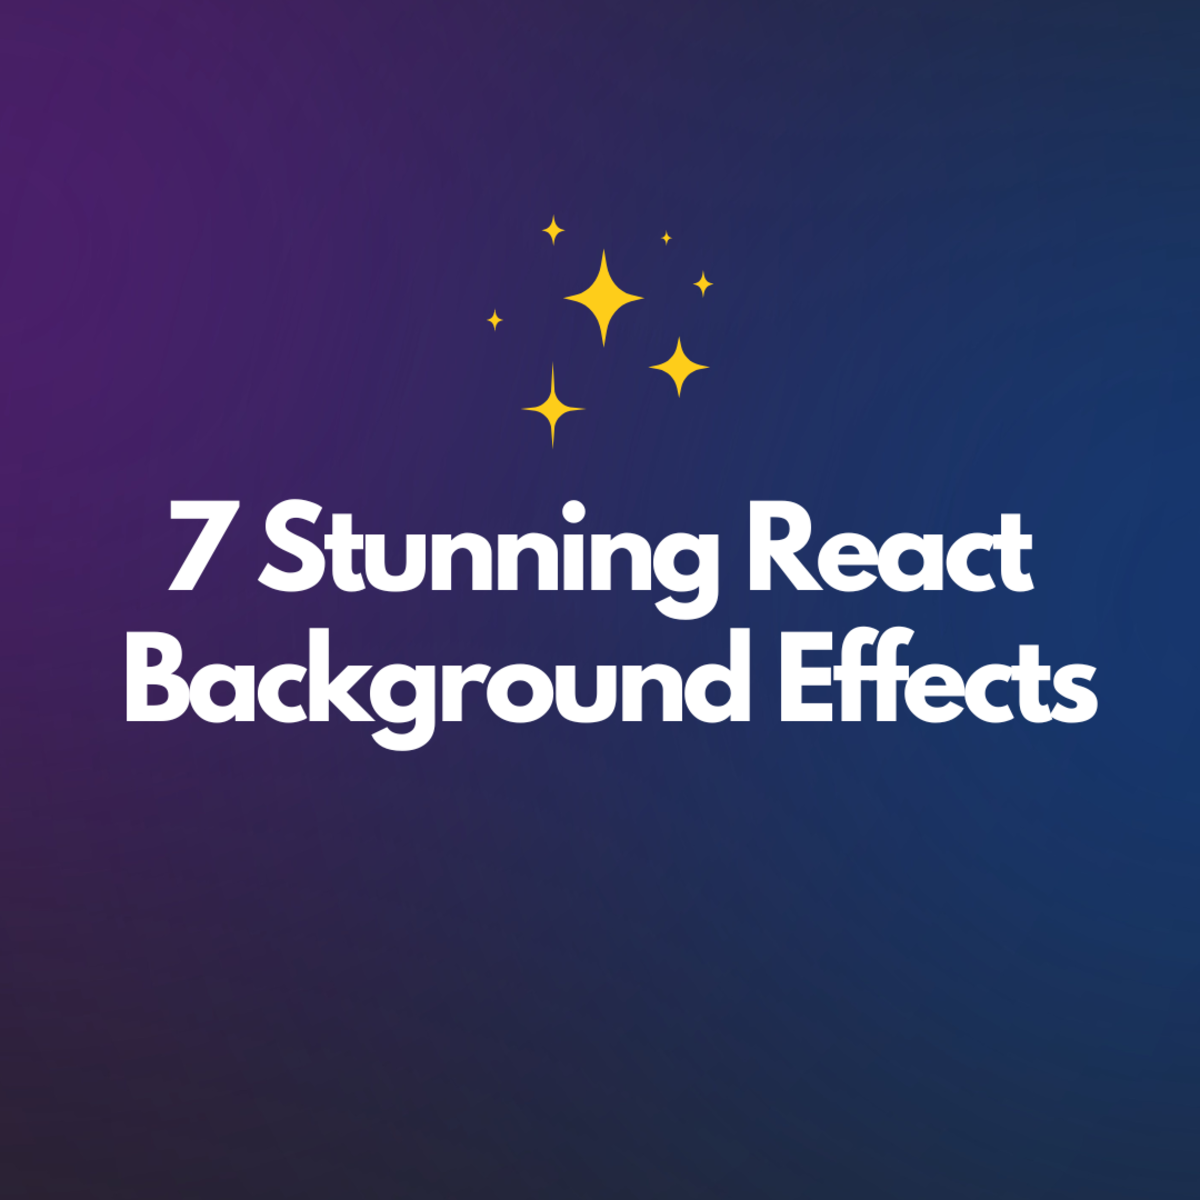 Discover a variety of super cool React background effects in this ultlimate list!